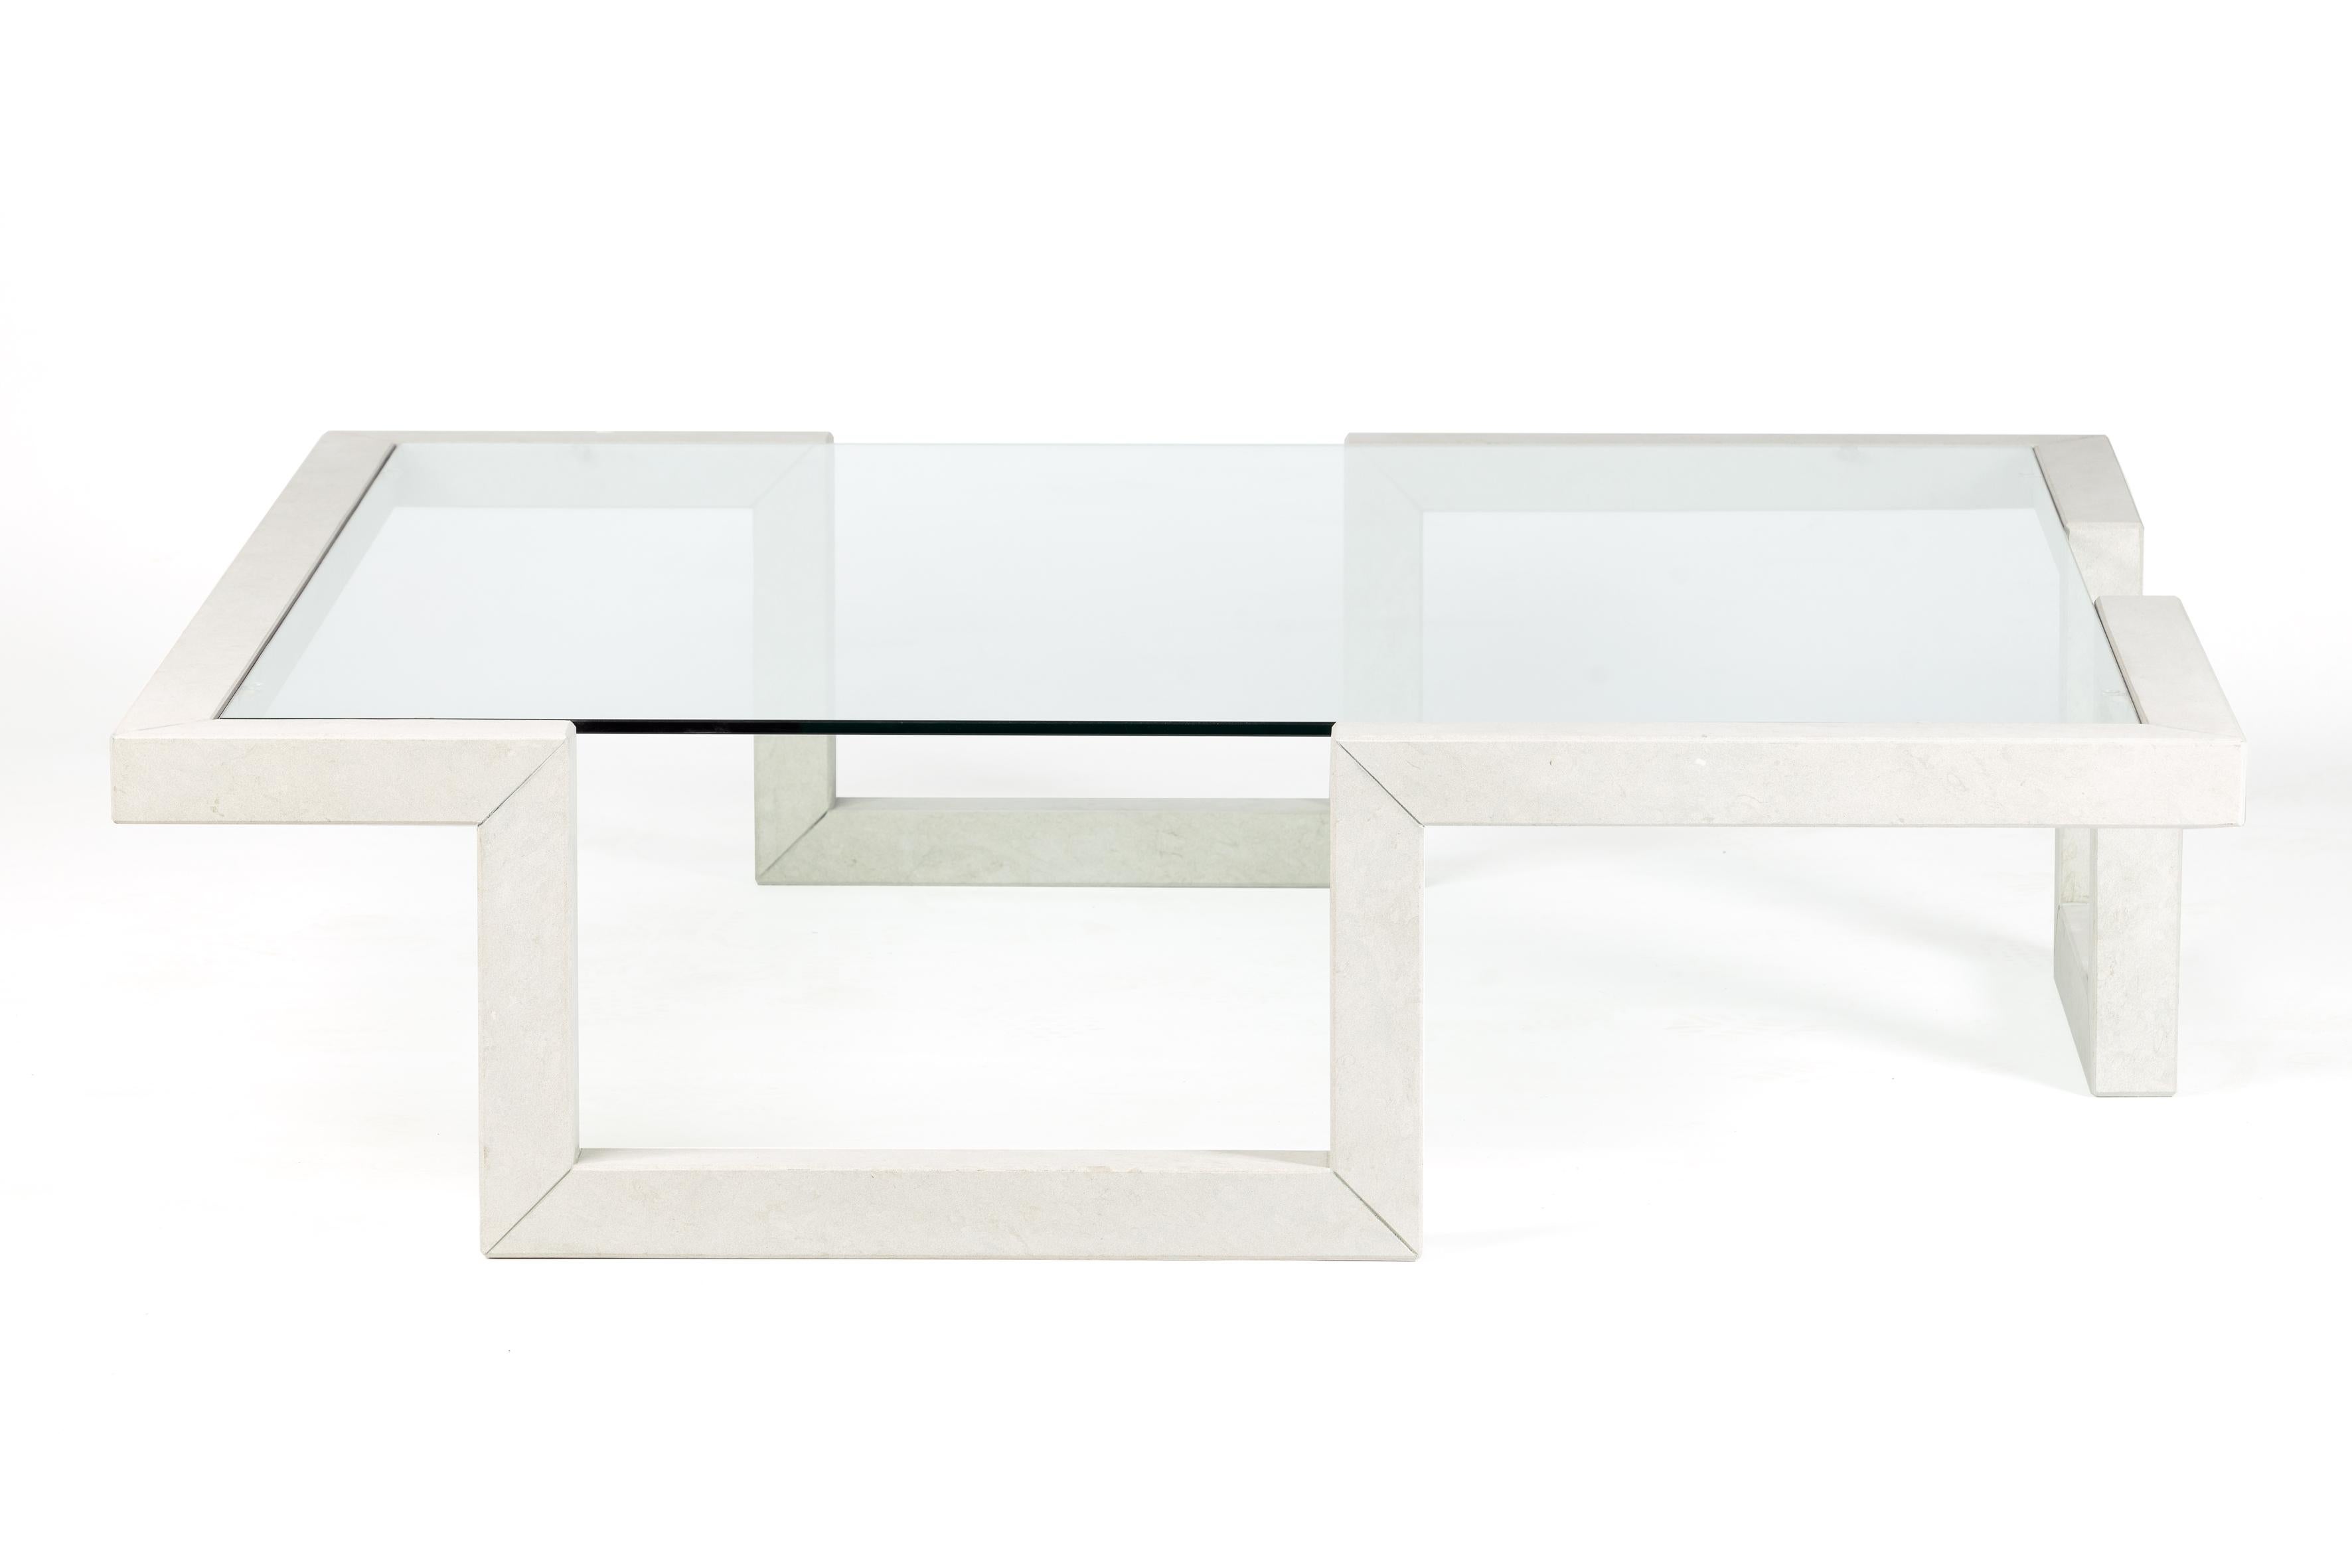 Castile is a marble coffee table with a linear and perfectly proportioned design. It consists of a fine structure of Bateig marble, a natural stone of Spanish origin, which runs through the space making square shapes. The table is supported by three